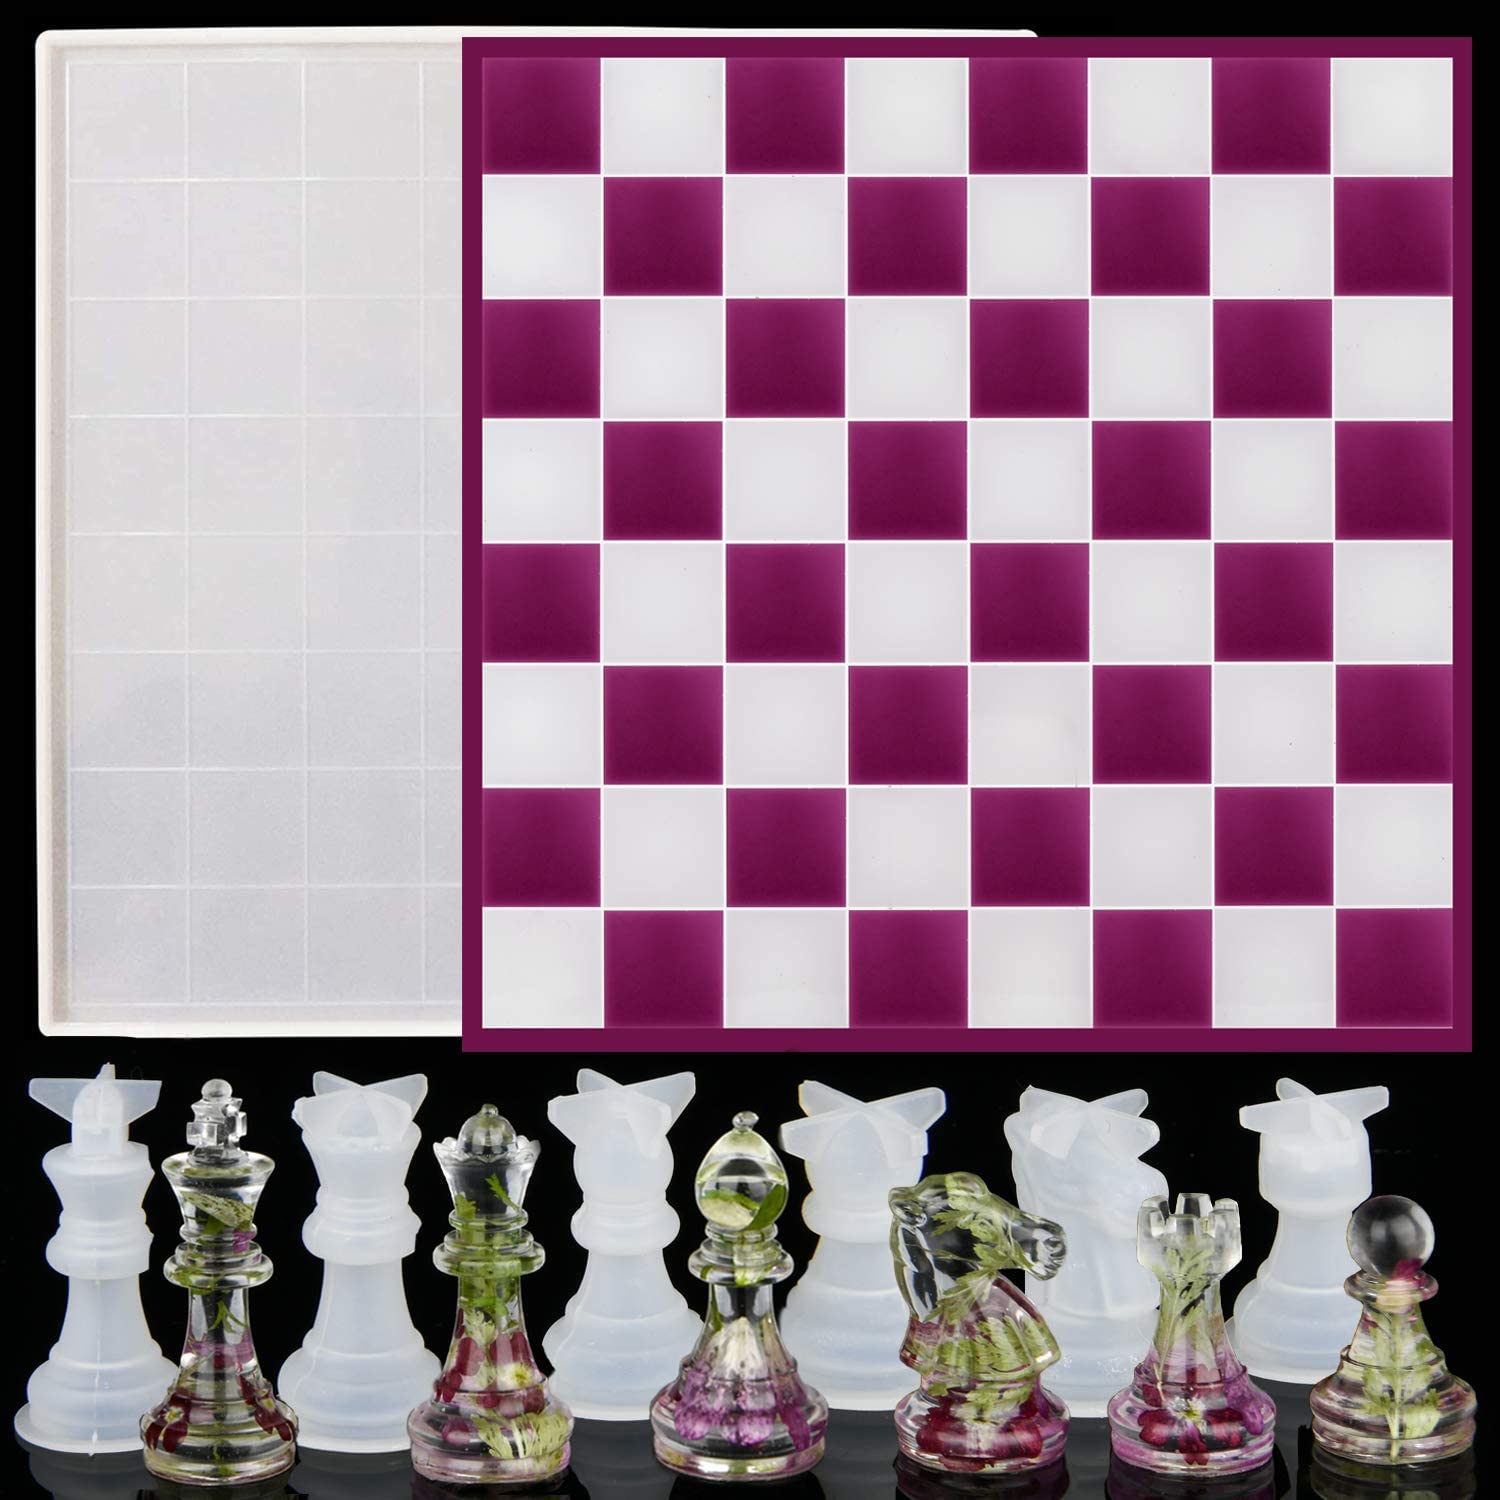 Resin Chess Set Mold,Upgraded 3 in 1 Chess Checkers Backgammon Molds for Epoxy  Resin,3D Full Size Silicone Chess Pieces and Chess Board Molds for Resi for  Sale in Bothell, WA - OfferUp